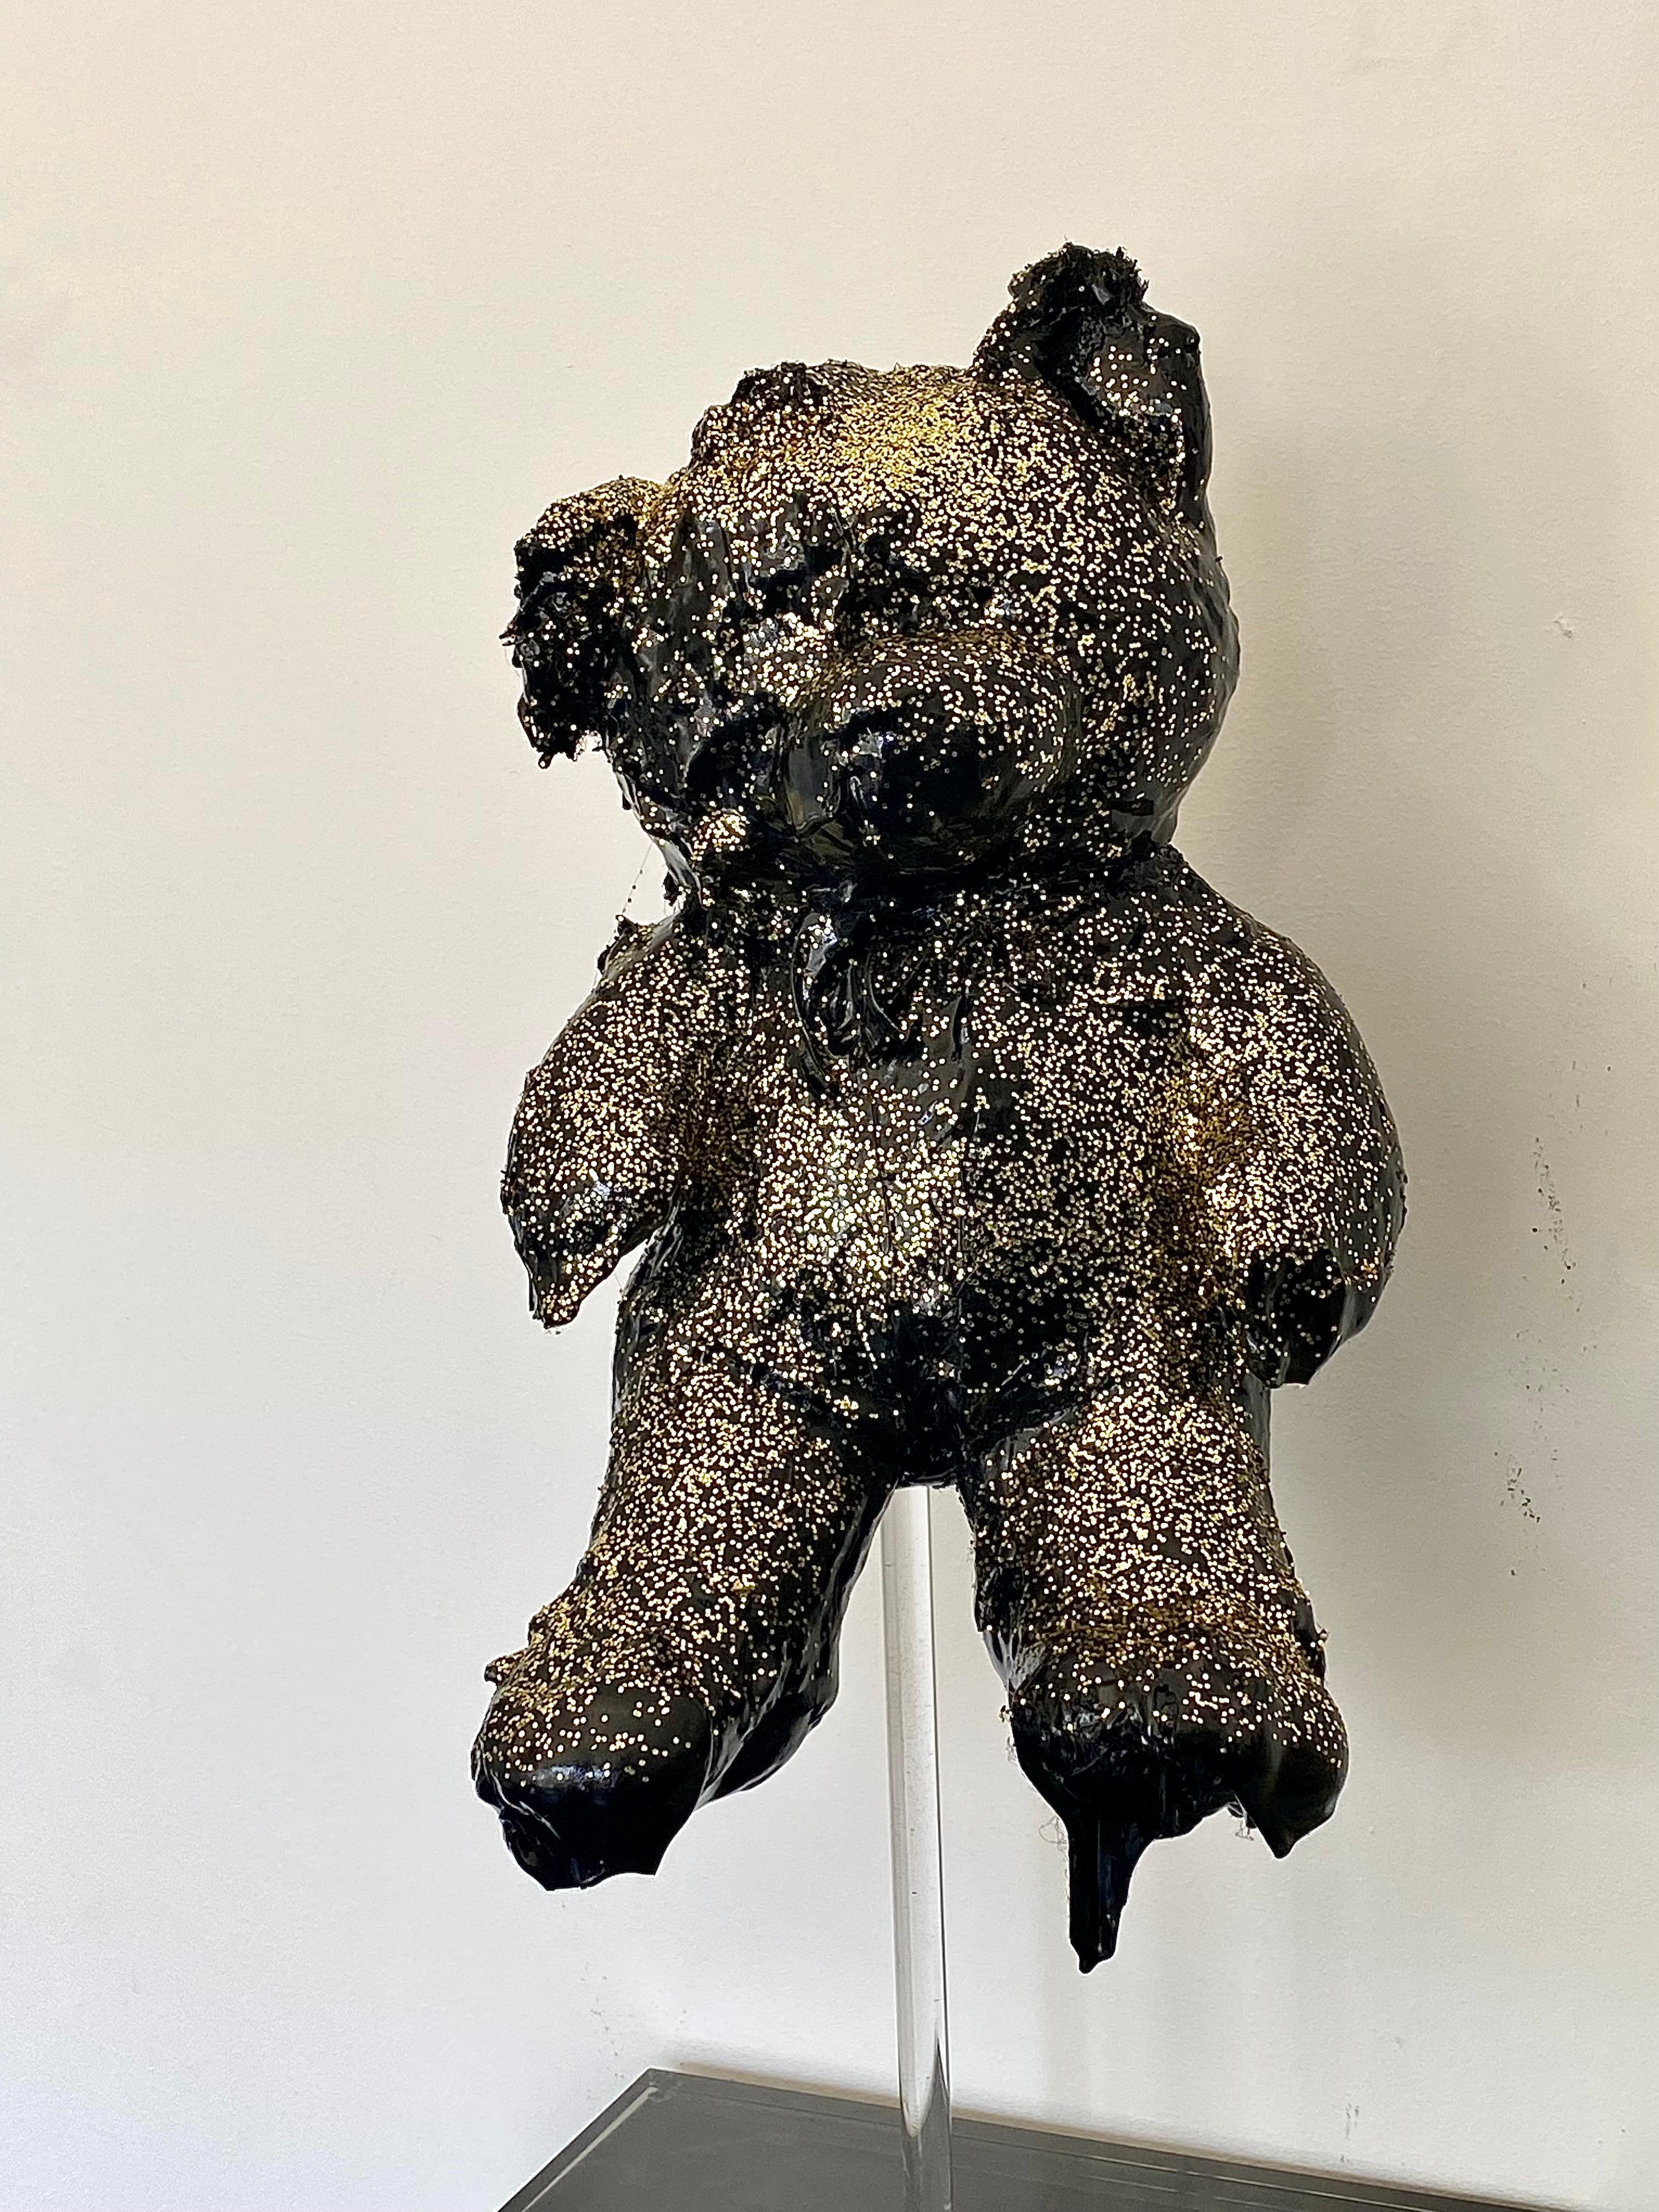 Black Tar and Gold Glitter Teddy Sculpture, 21st Century by Mattia Biagi In New Condition For Sale In Culver City, CA